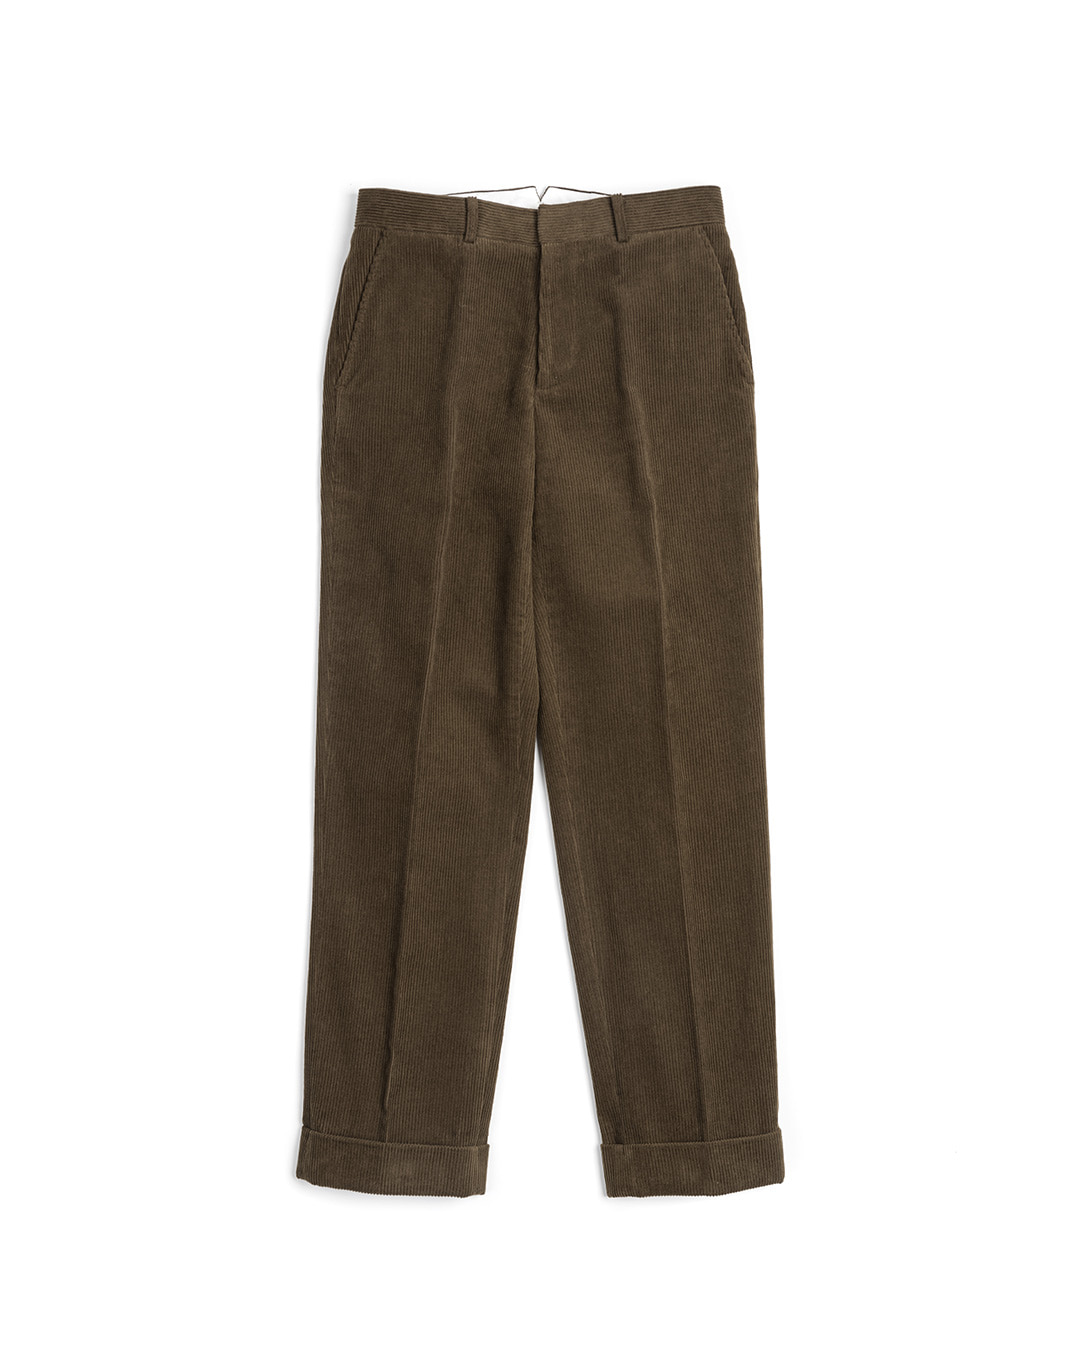 04 CORDUROY TROUSERS (olive)